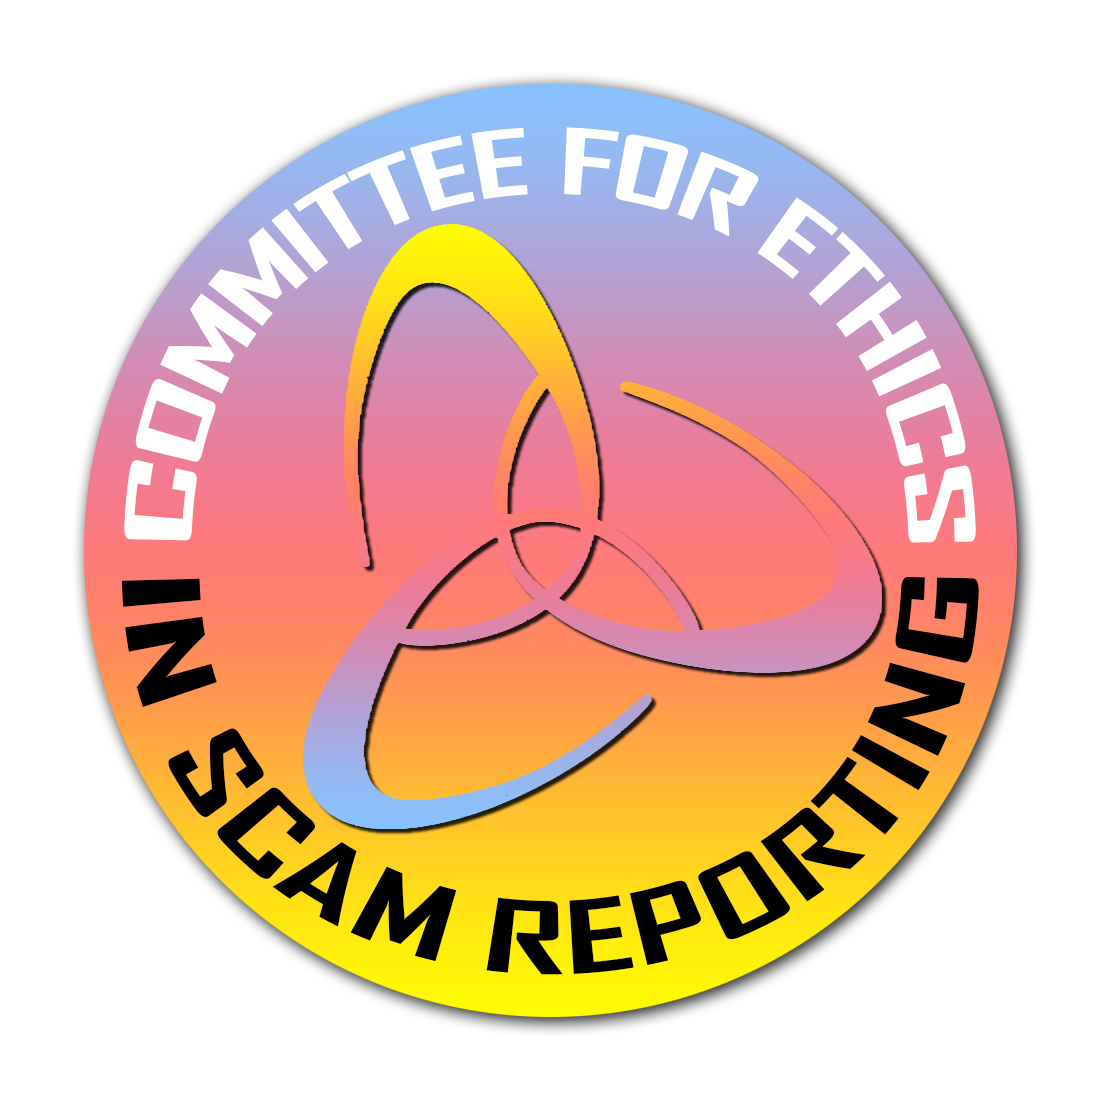 Committee for Ethics in Scam Reporting